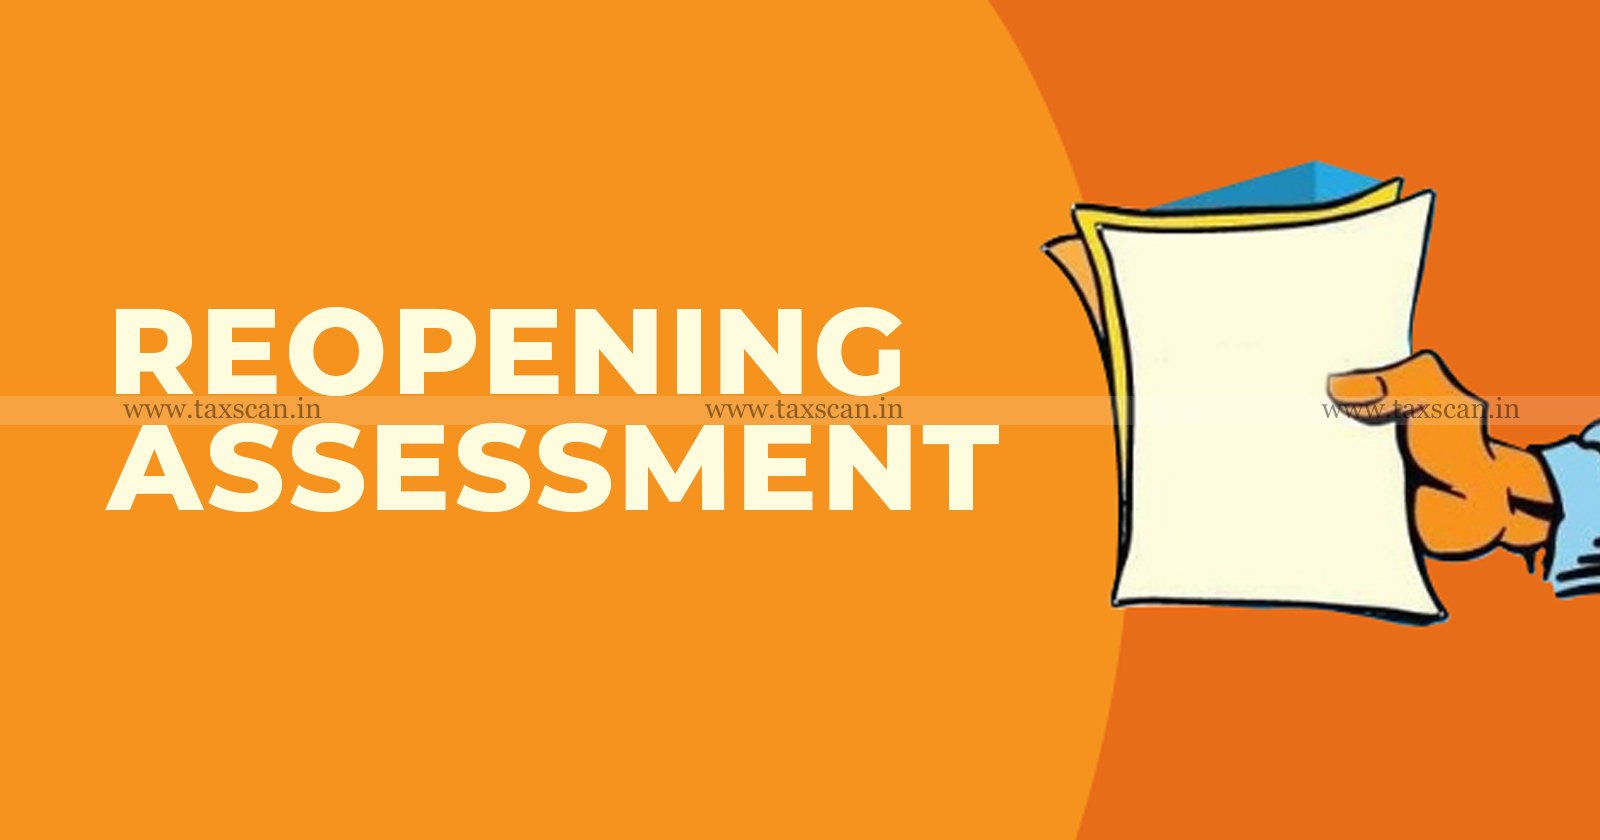 Reopening Reassessment - Reassessment - Reopening - Standalone Basis - Proceedings - validity of Proceedings - Income Tax Act - Income Tax - ITAT - taxscan